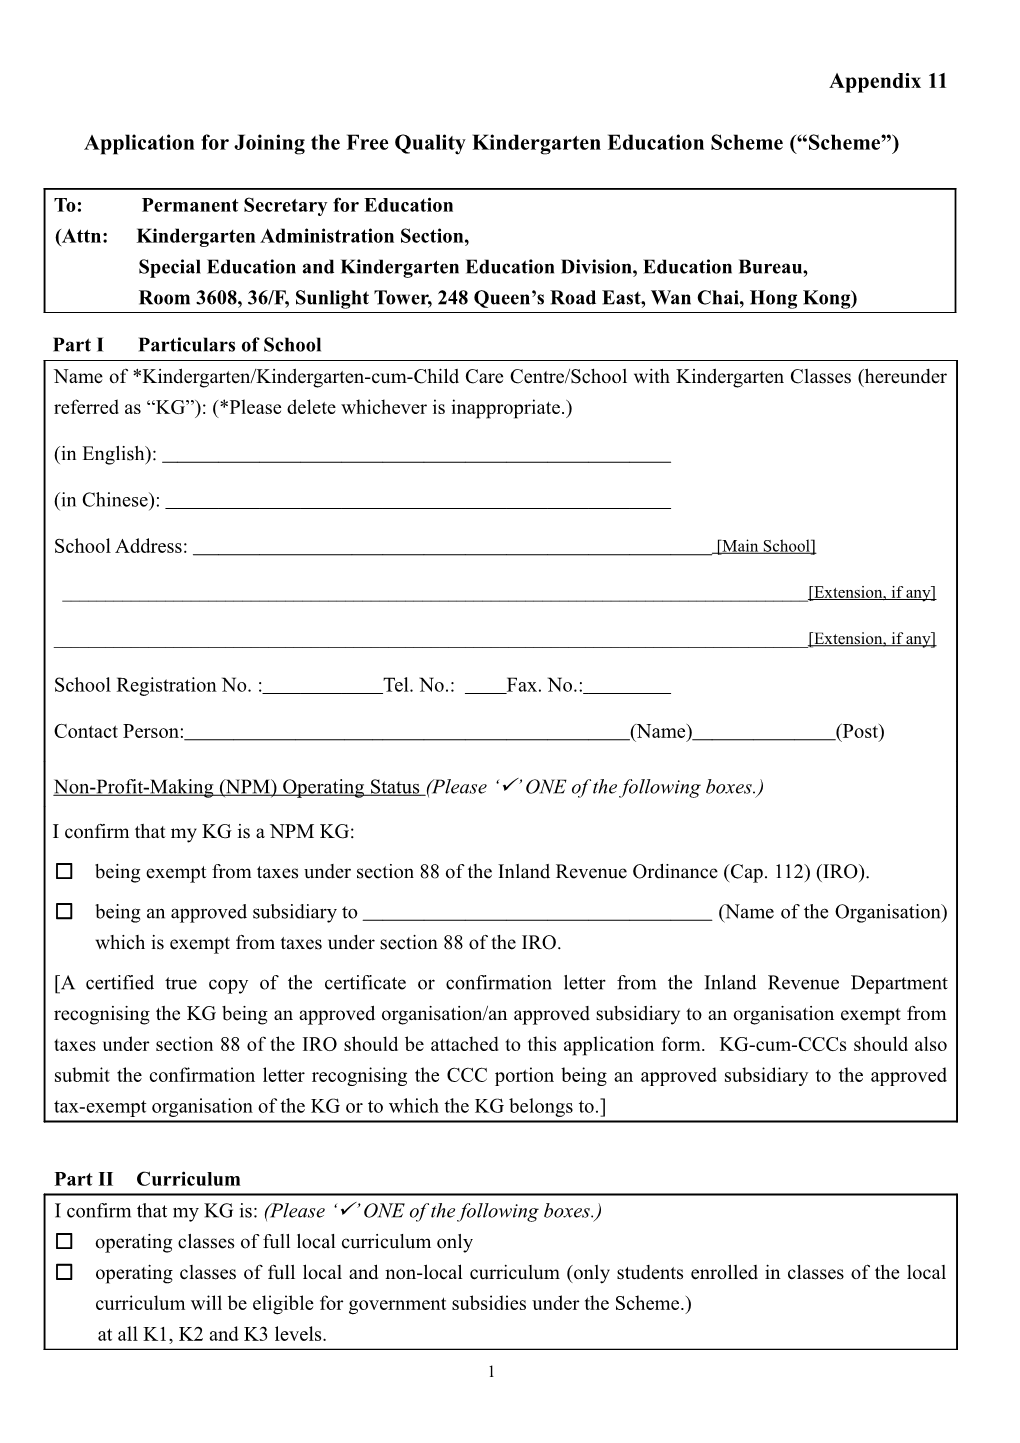 Application for Joining the Free Quality Kindergarten Education Scheme ( Scheme )